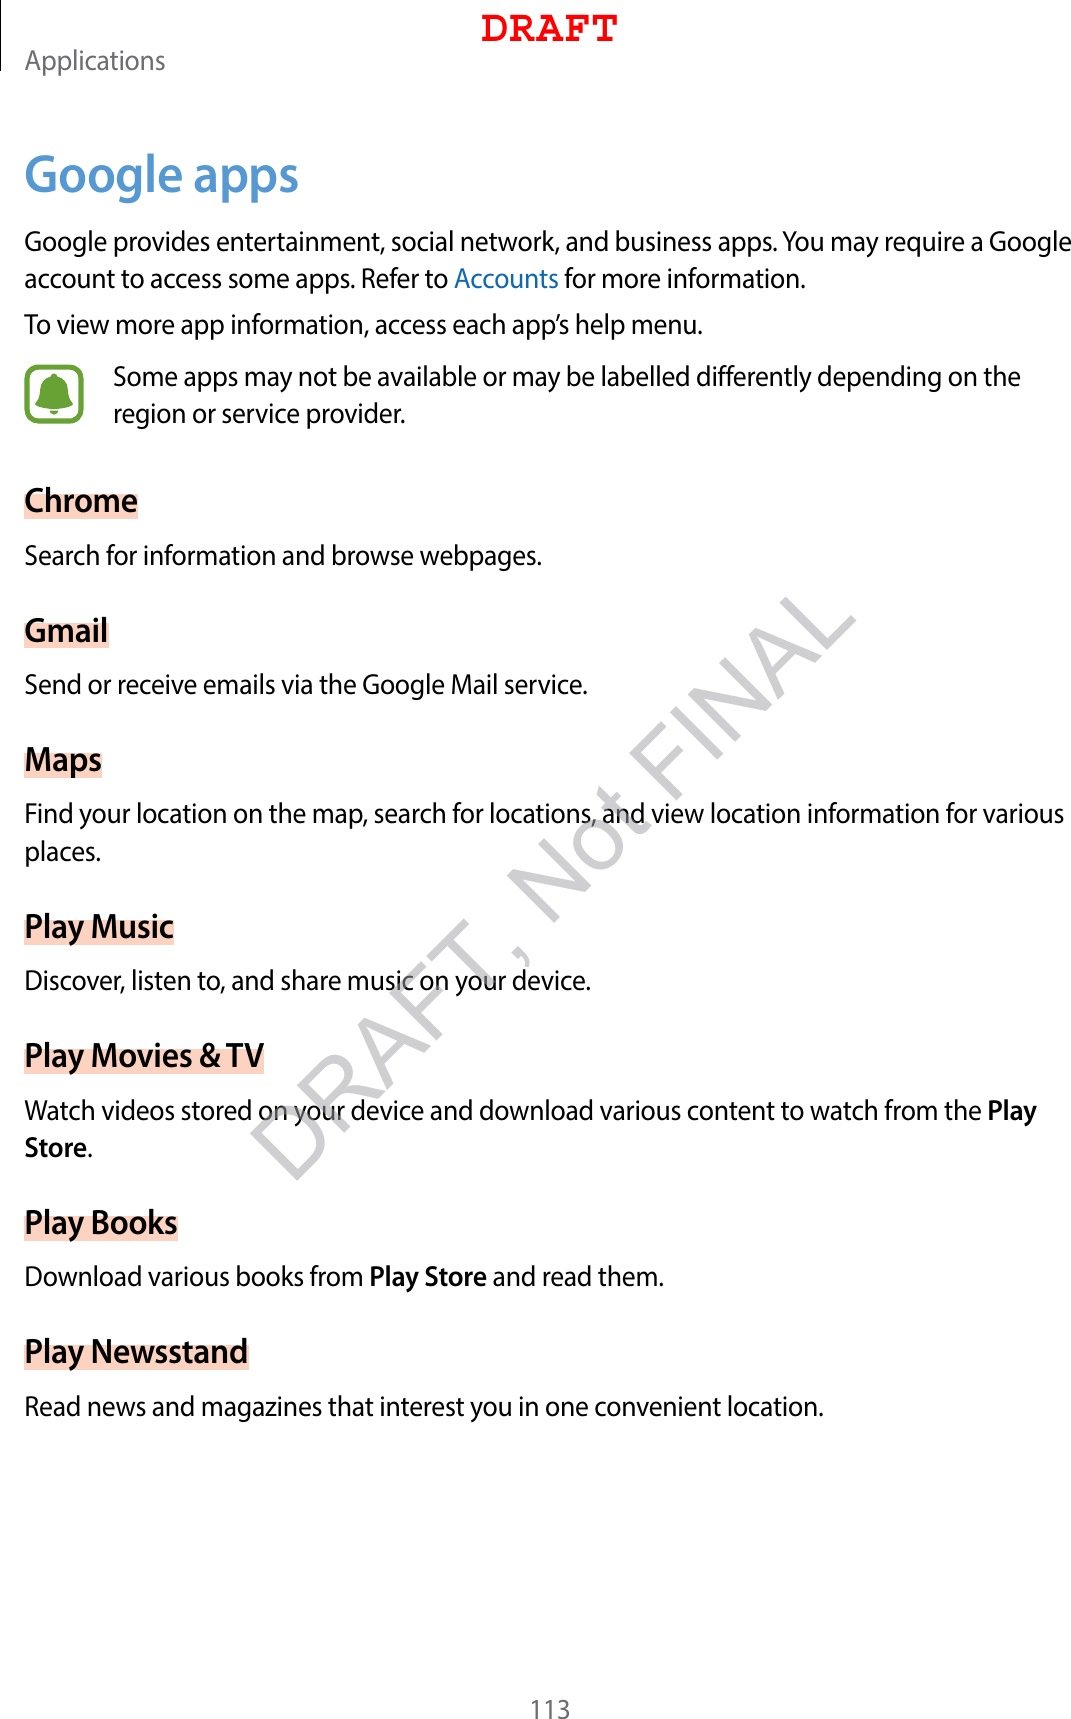 Applications113Google appsGoogle provides entertainment, social network, and business apps. You may require a Google account to access some apps. Refer to Accounts for more information.To view more app information, access each app’s help menu.Some apps may not be available or may be labelled differently depending on the region or service provider.ChromeSearch for information and browse webpages.GmailSend or receive emails via the Google Mail service.MapsFind your location on the map, search for locations, and view location information for various places.Play MusicDiscover, listen to, and share music on your device.Play Movies &amp; TVWatch videos stored on your device and download various content to watch from the Play Store.Play BooksDownload various books from Play Store and read them.Play NewsstandRead news and magazines that interest you in one convenient location.DRAFTDRAFT, Not FINAL